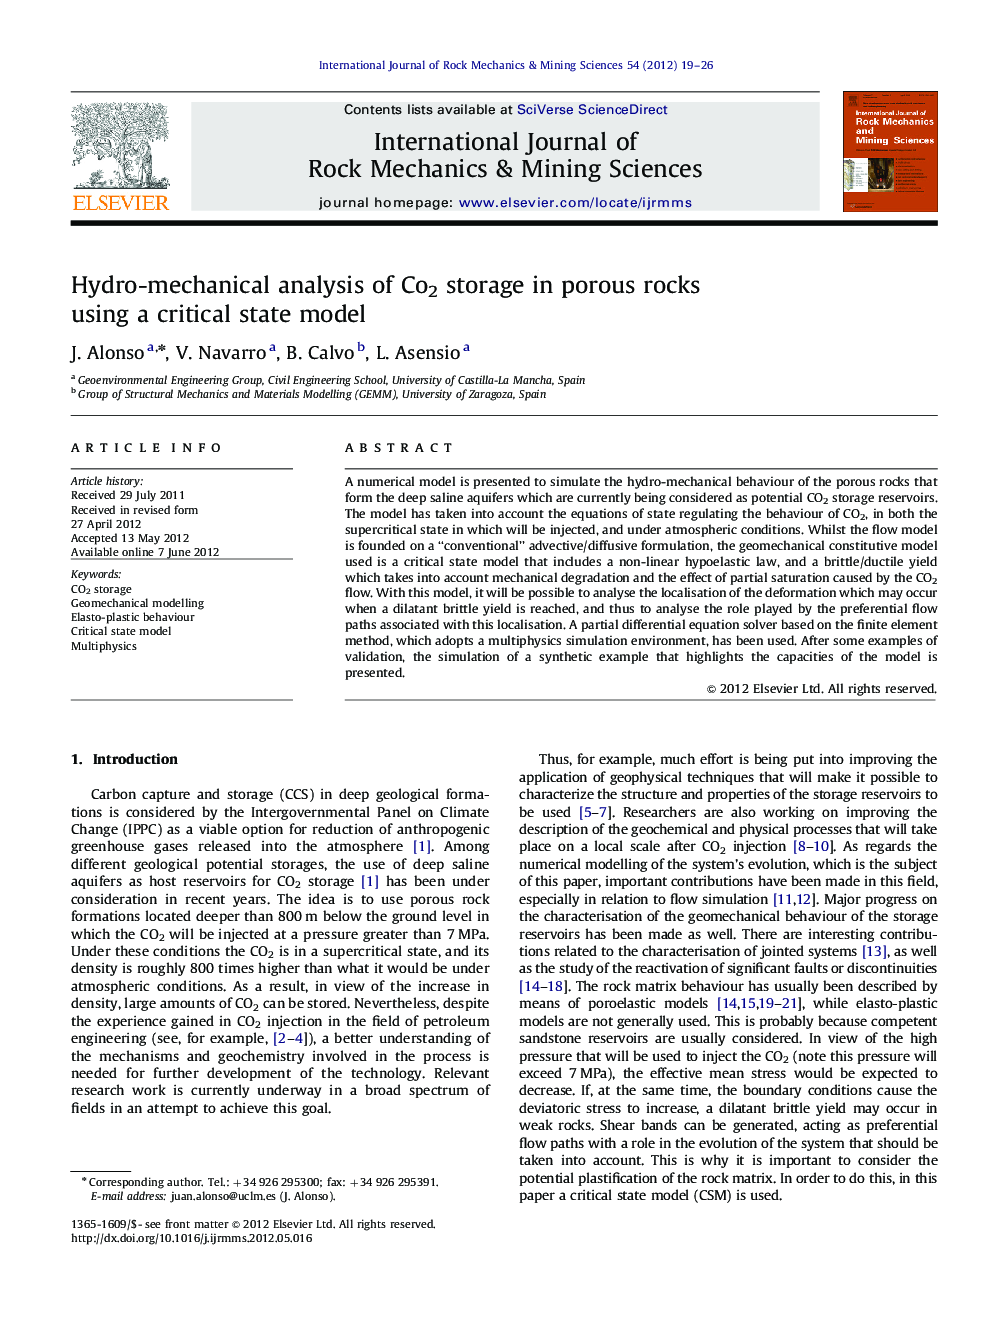 Hydro-mechanical analysis of Co2 storage in porous rocks using a critical state model